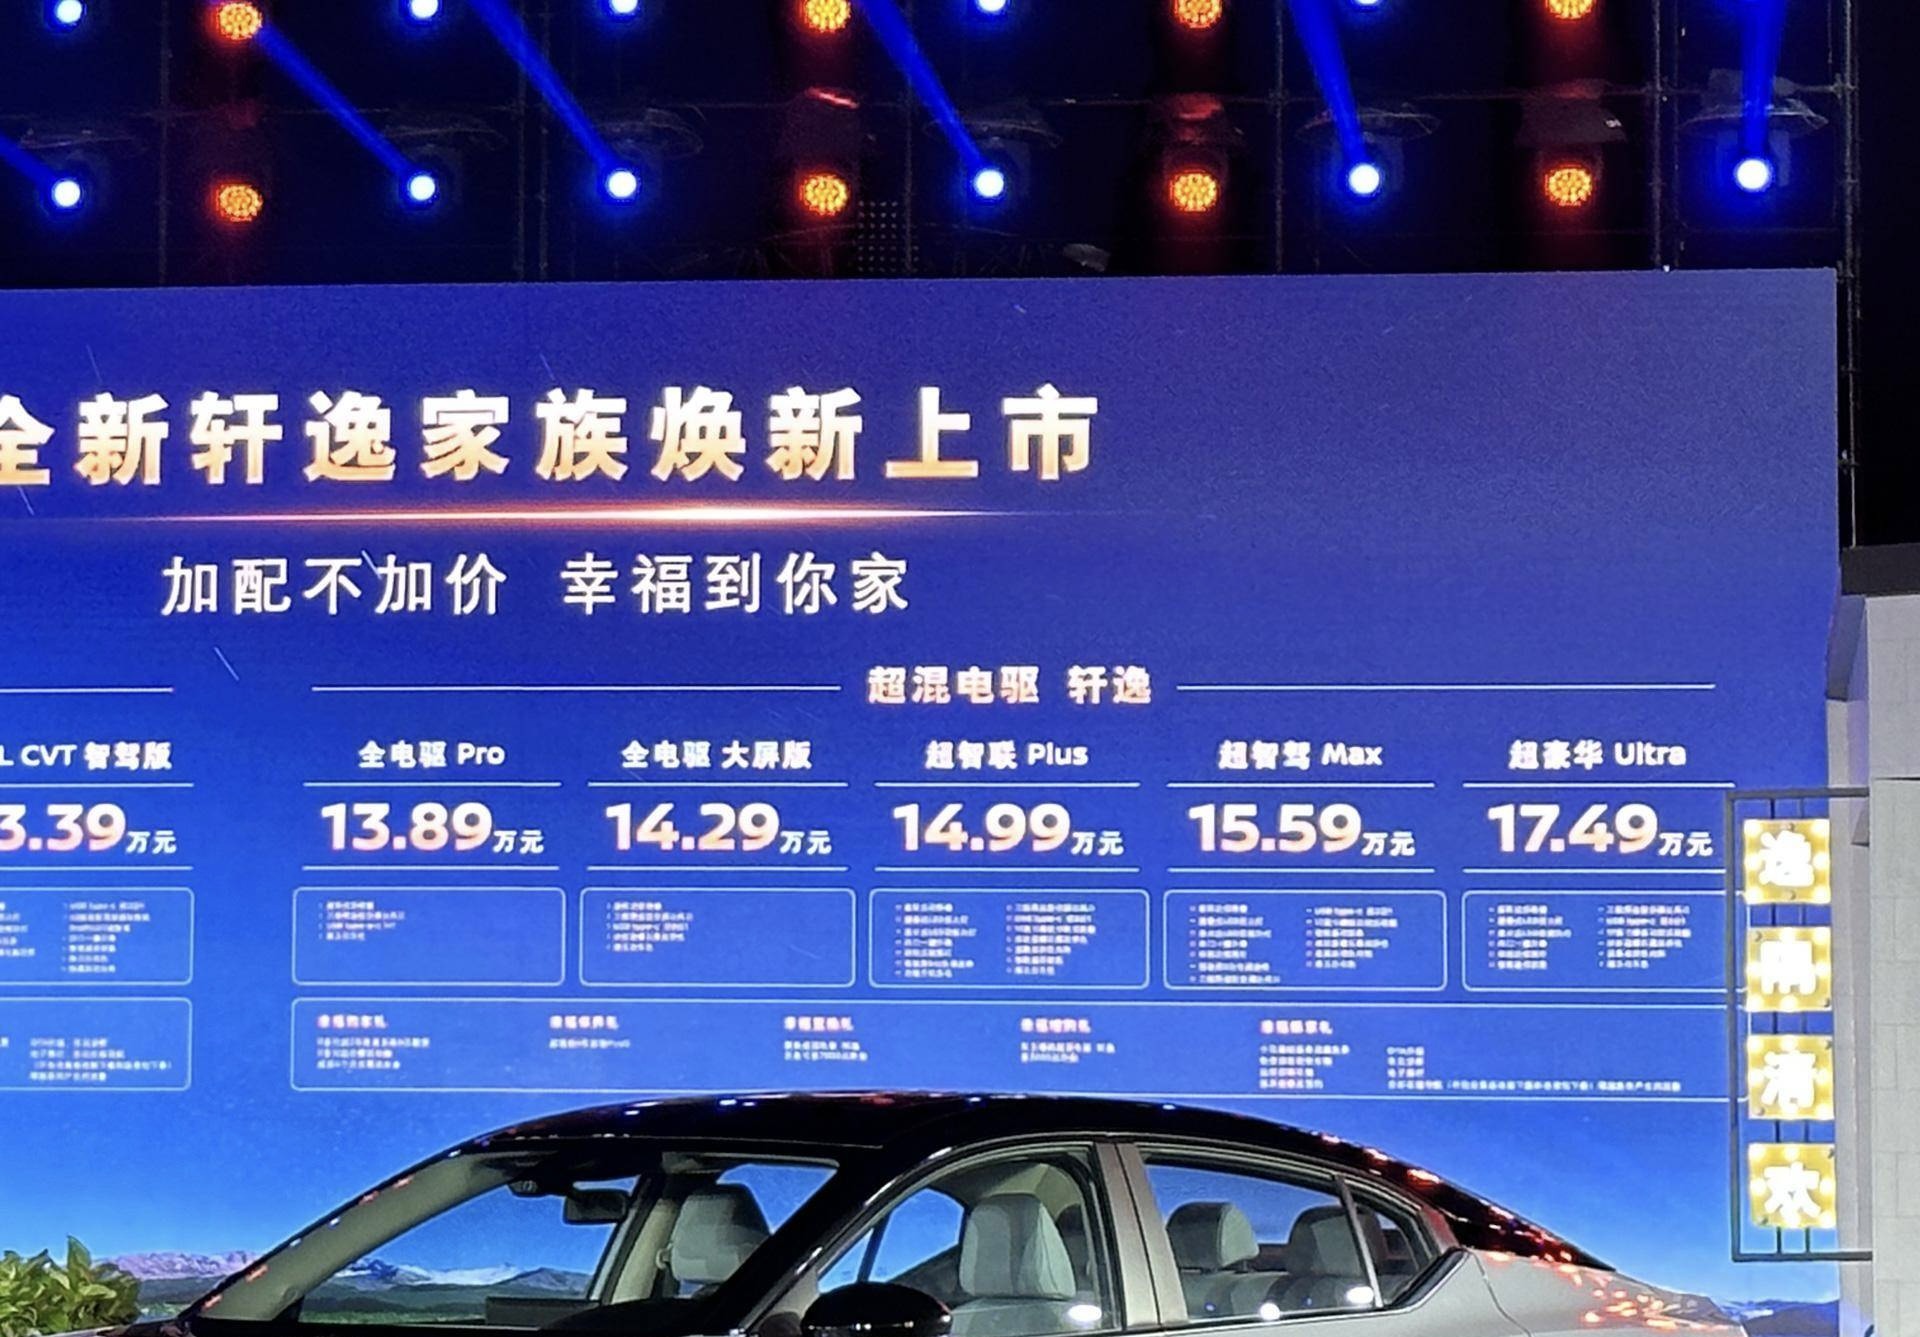 The new Nissan X-Trail e-POWER is launched with a price range of 138,900 to 174,900 RMB.